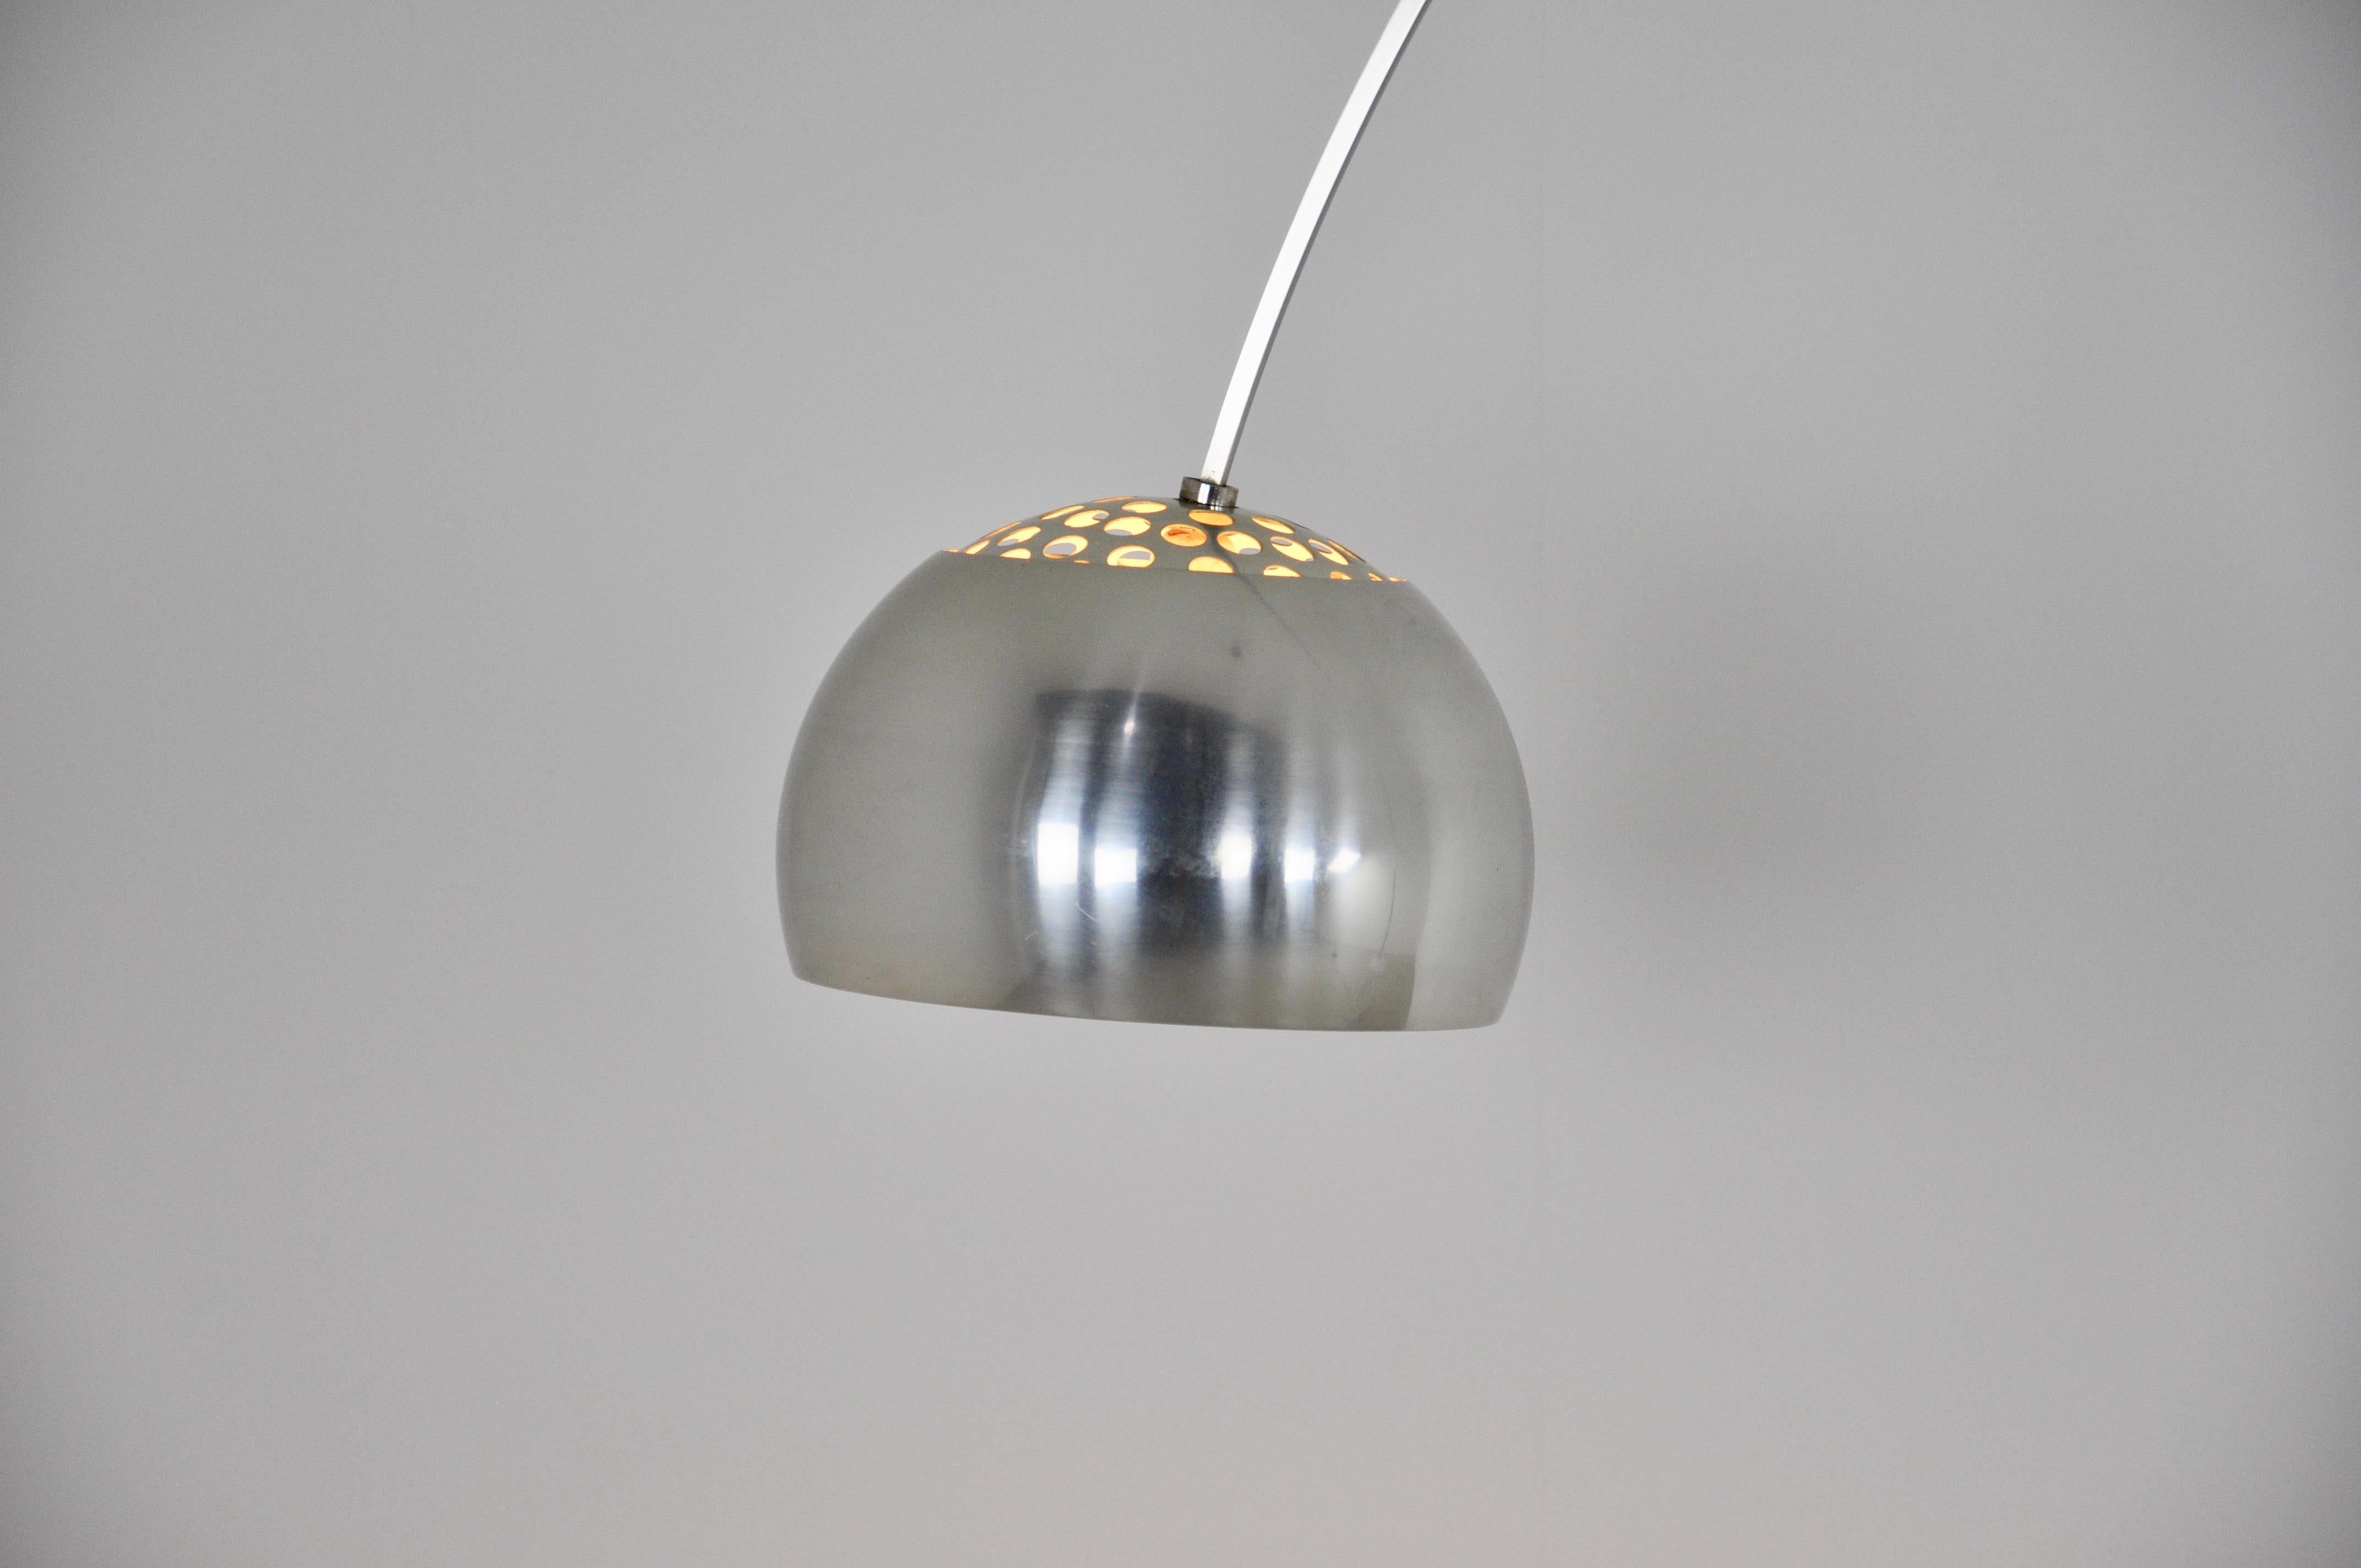 Arched floor lamp. Carrara marble base, metal structure. Stamped Floss. 
Wear due to time and the age of the lamp post.